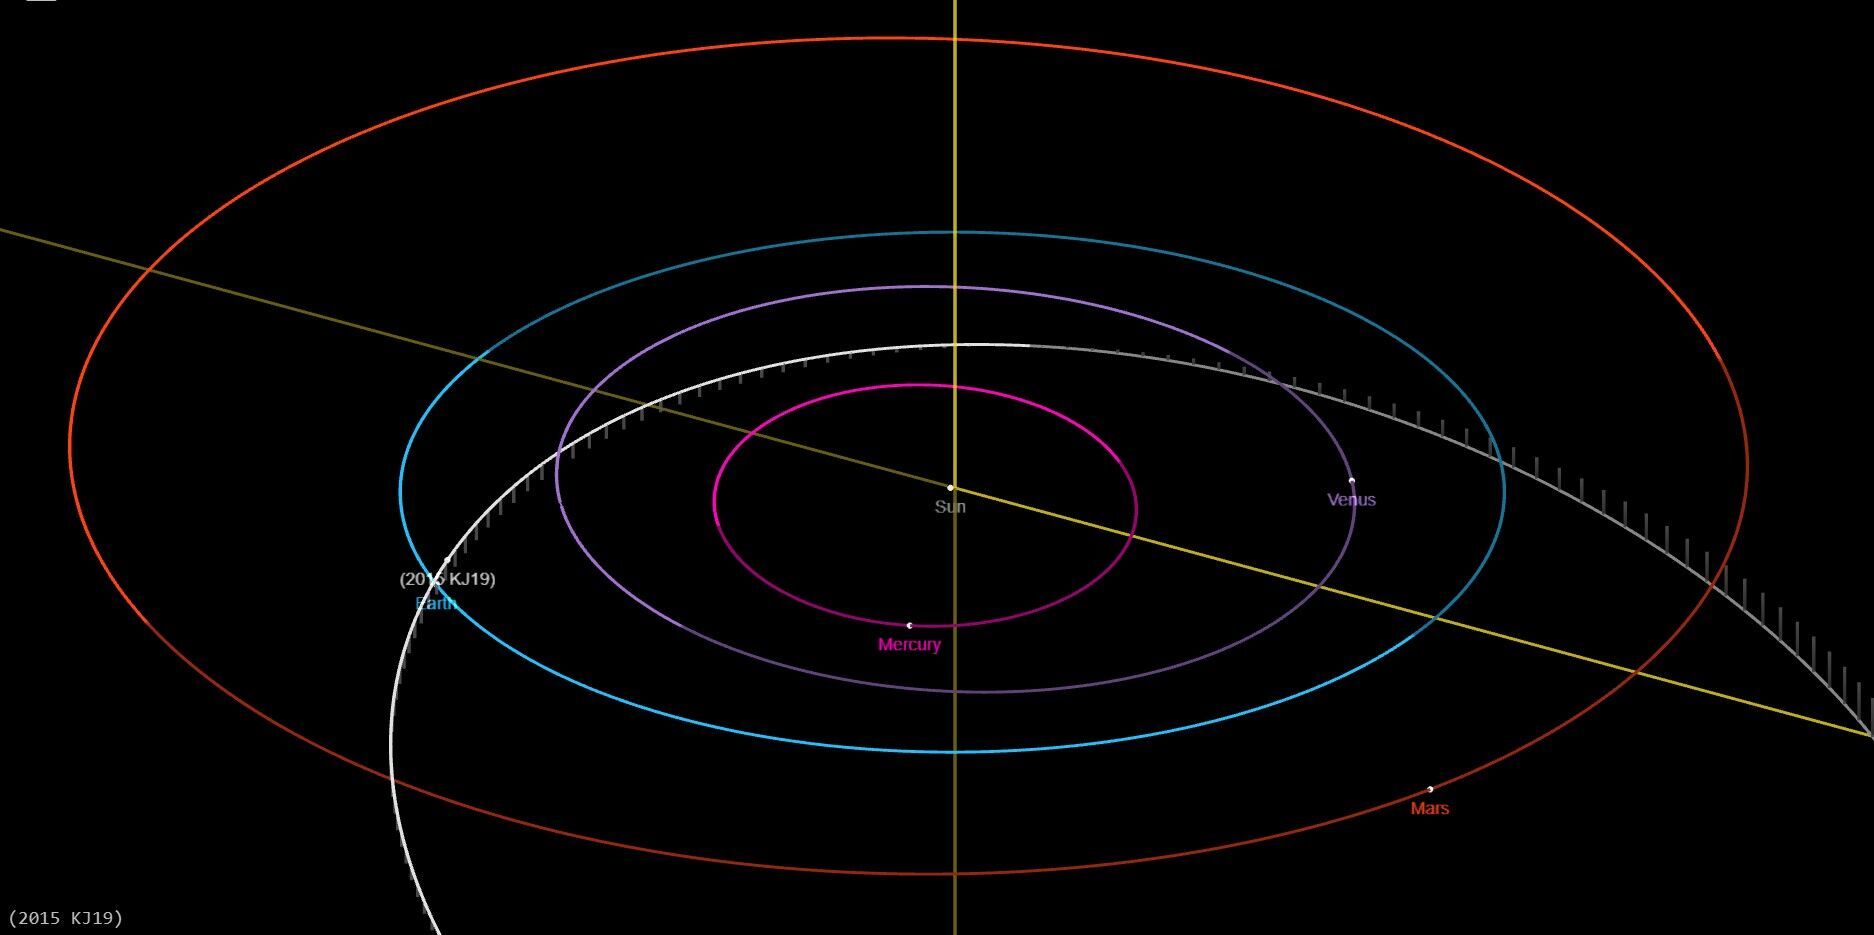 A 107-meter asteroid is approaching the Earth: is it worth worrying about?